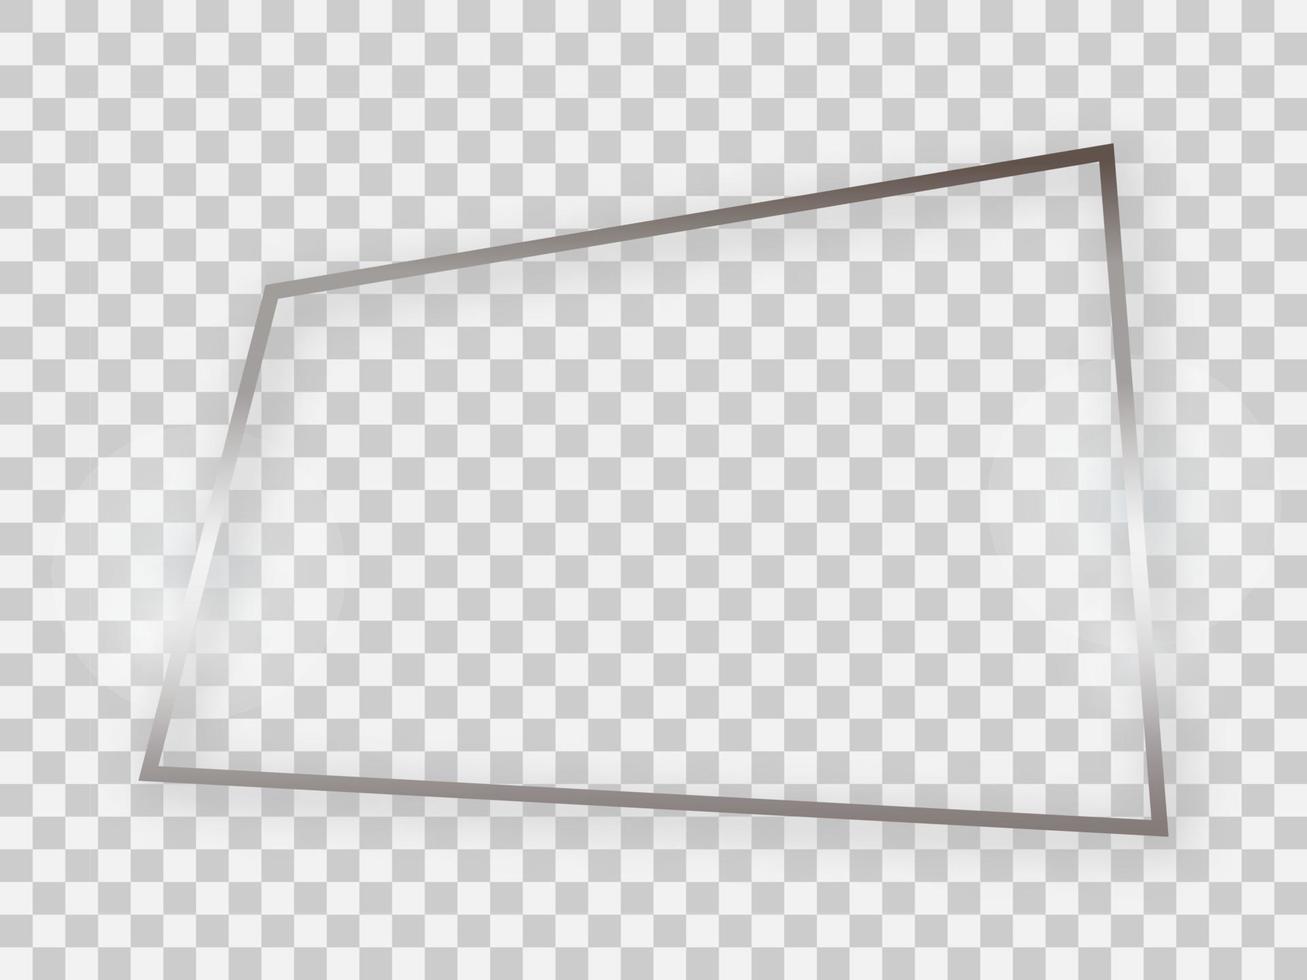 Silver shiny rectangular frame with glowing effects and shadows on transparent background. Vector illustration